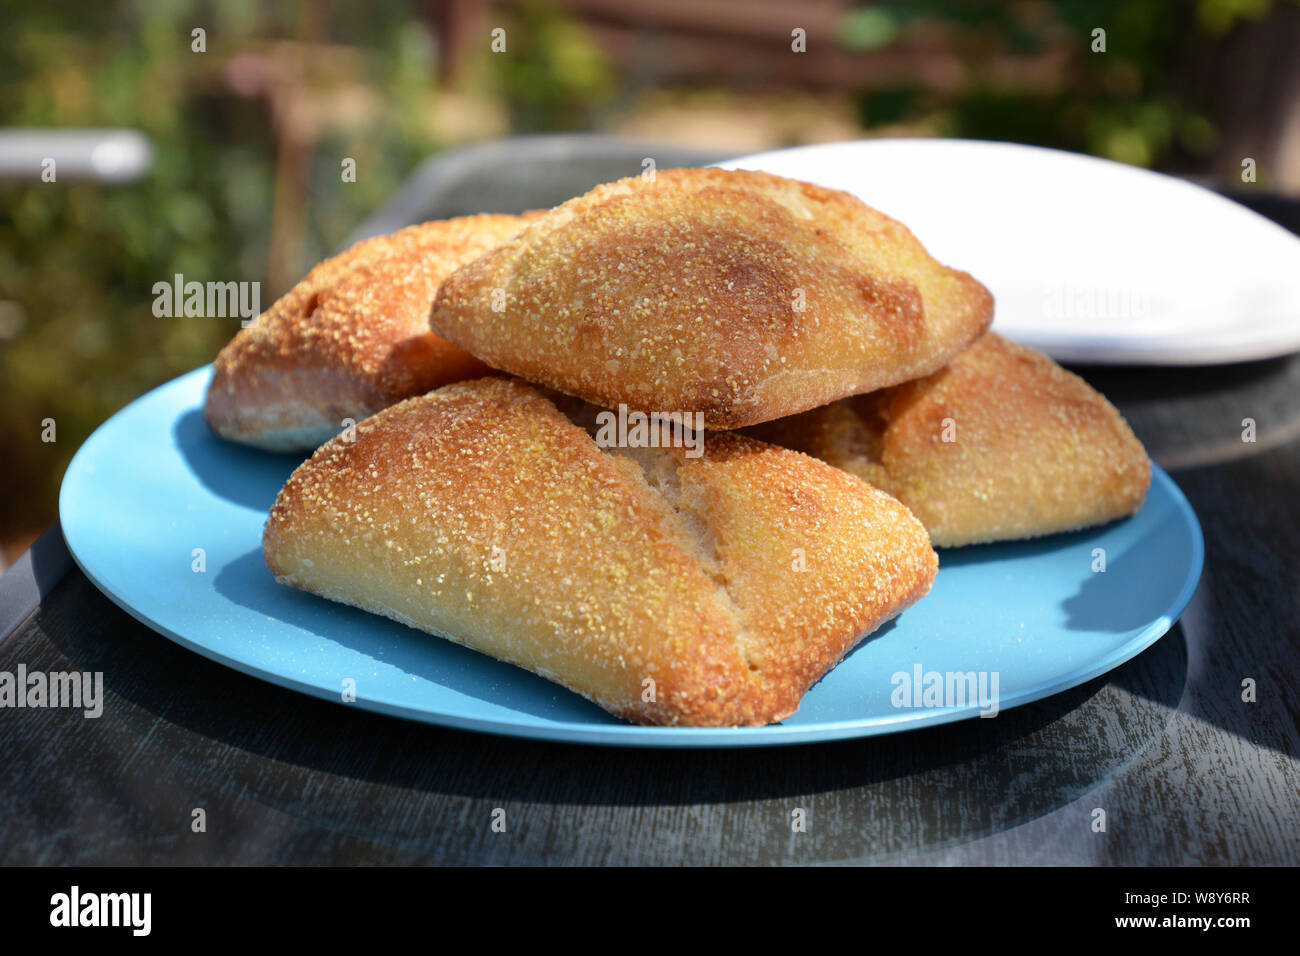 Fresh crusty bread rolls piled up on a blue plate on outdoor table Stock Photo